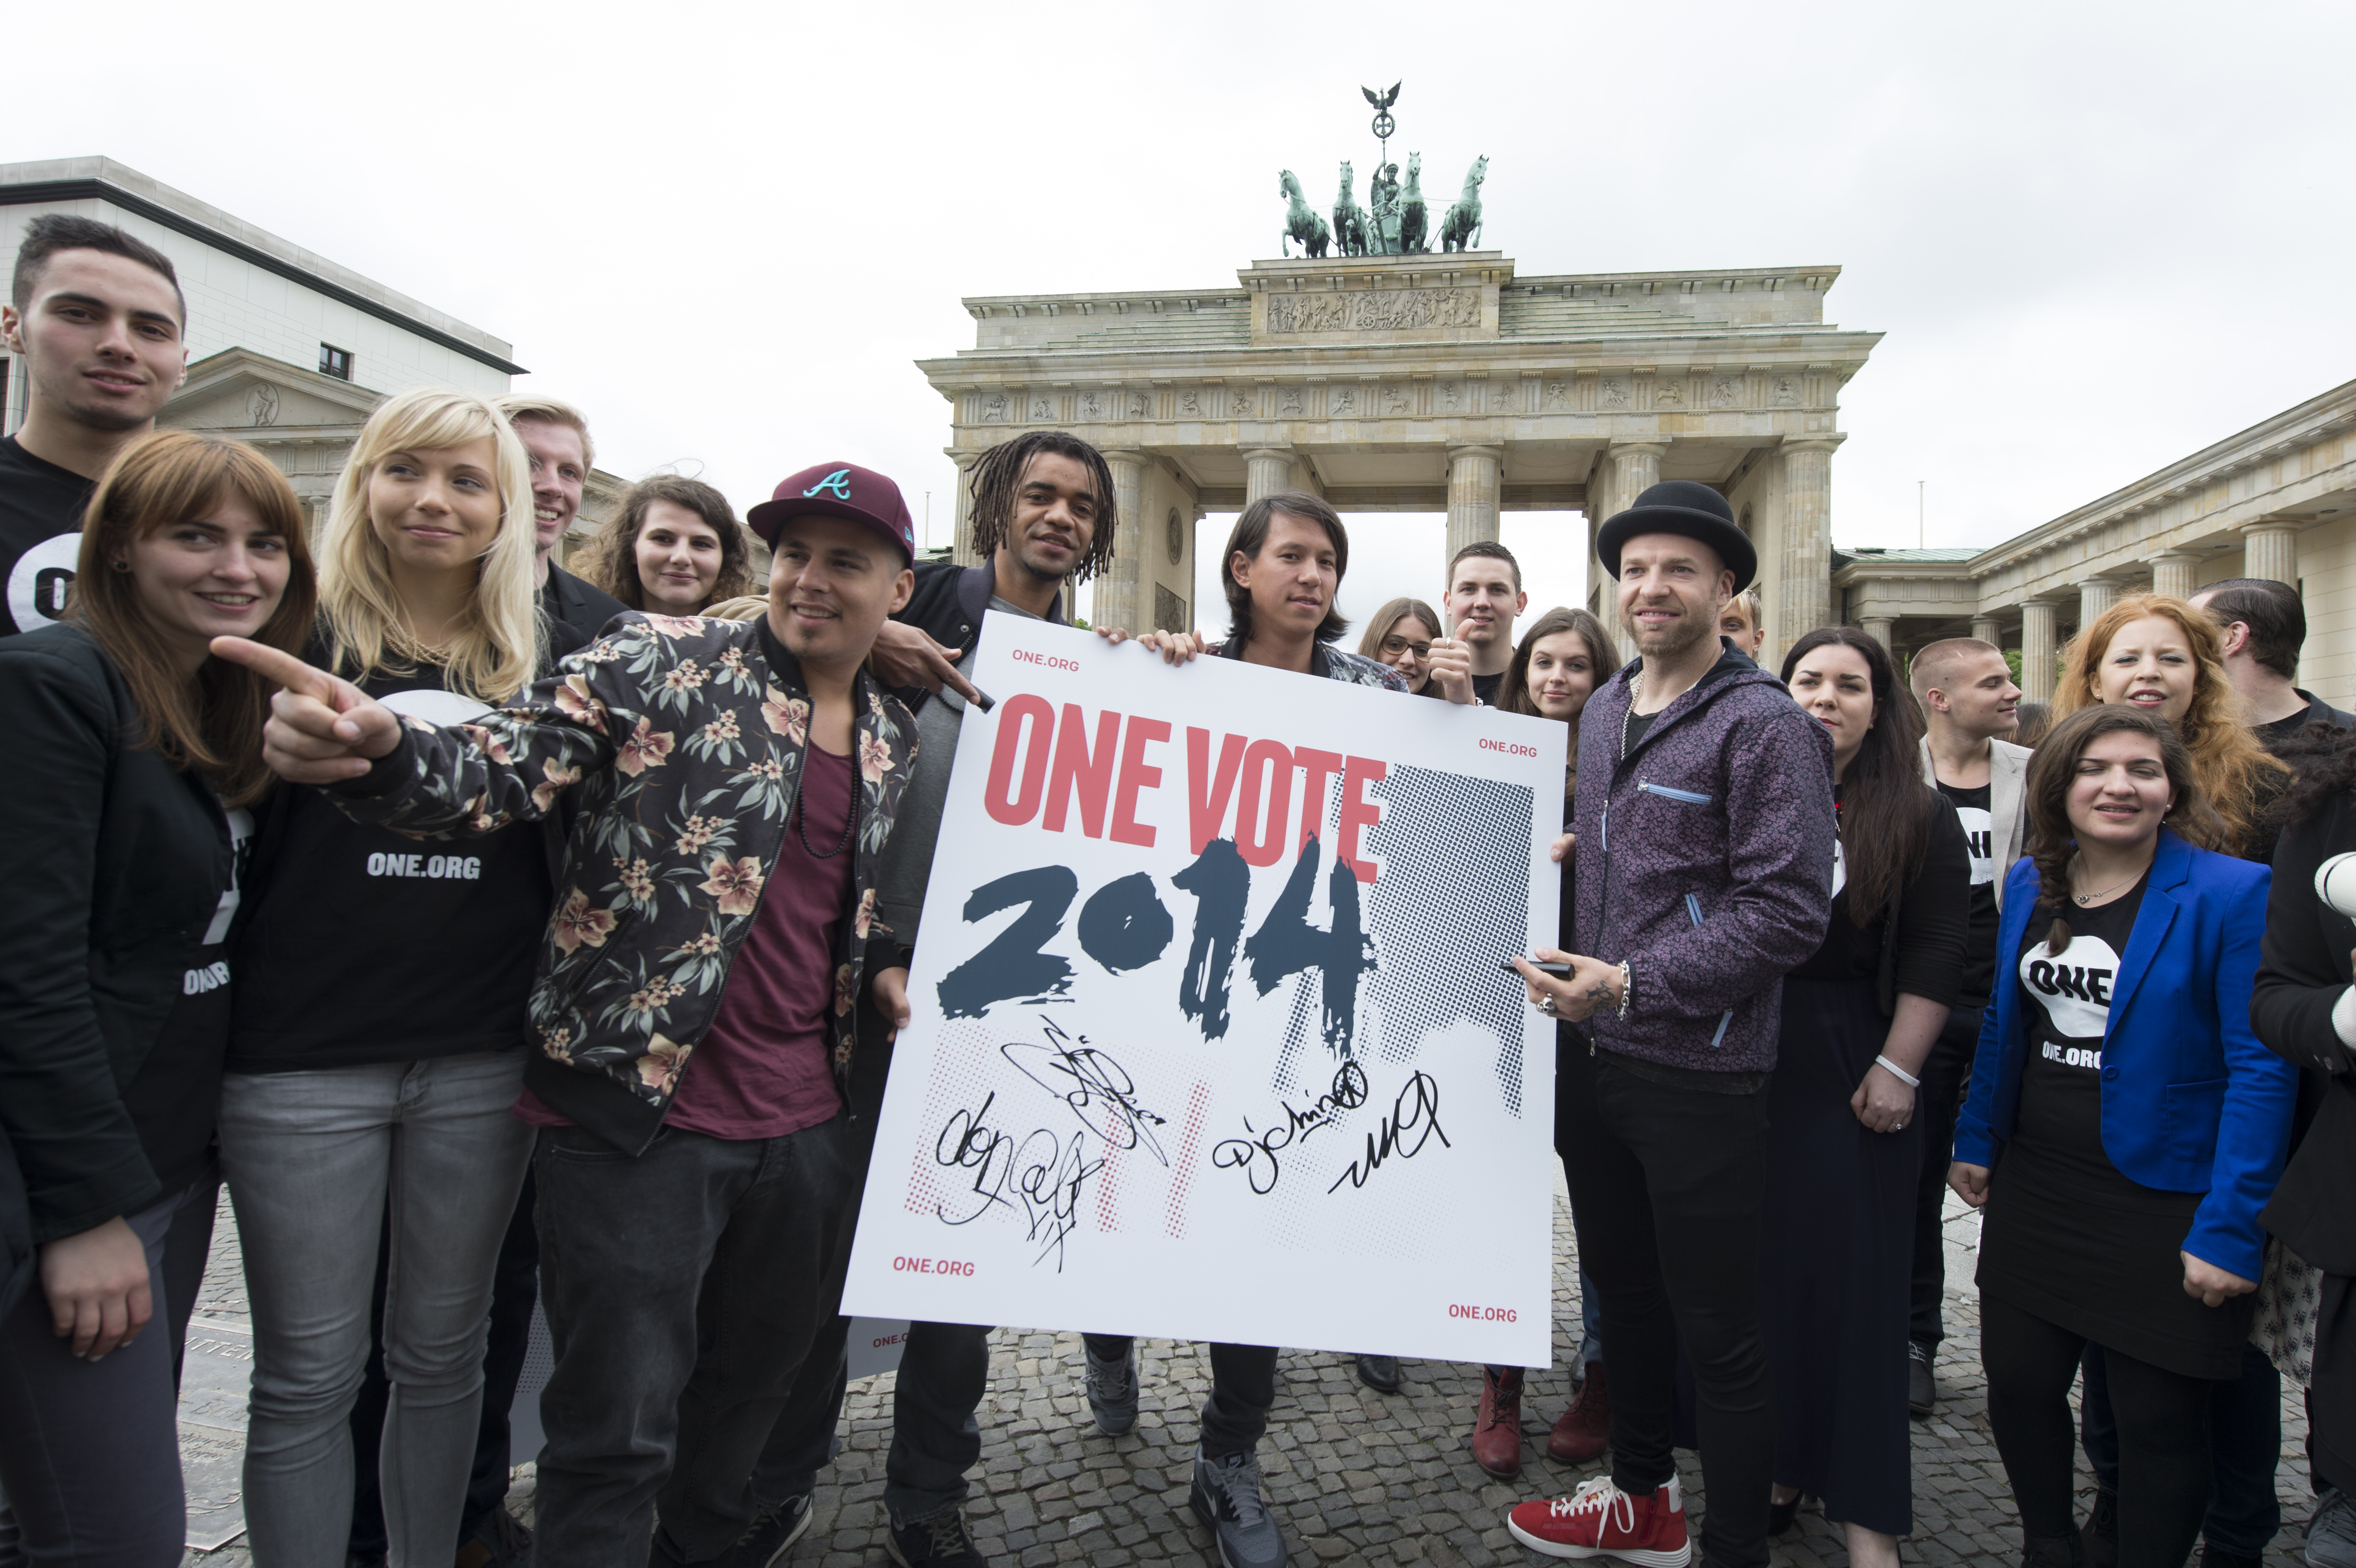 ONE VOTE 2014 launches in Germany with a morning TV appearance, hip-hop artists and the Brandenburg Gate